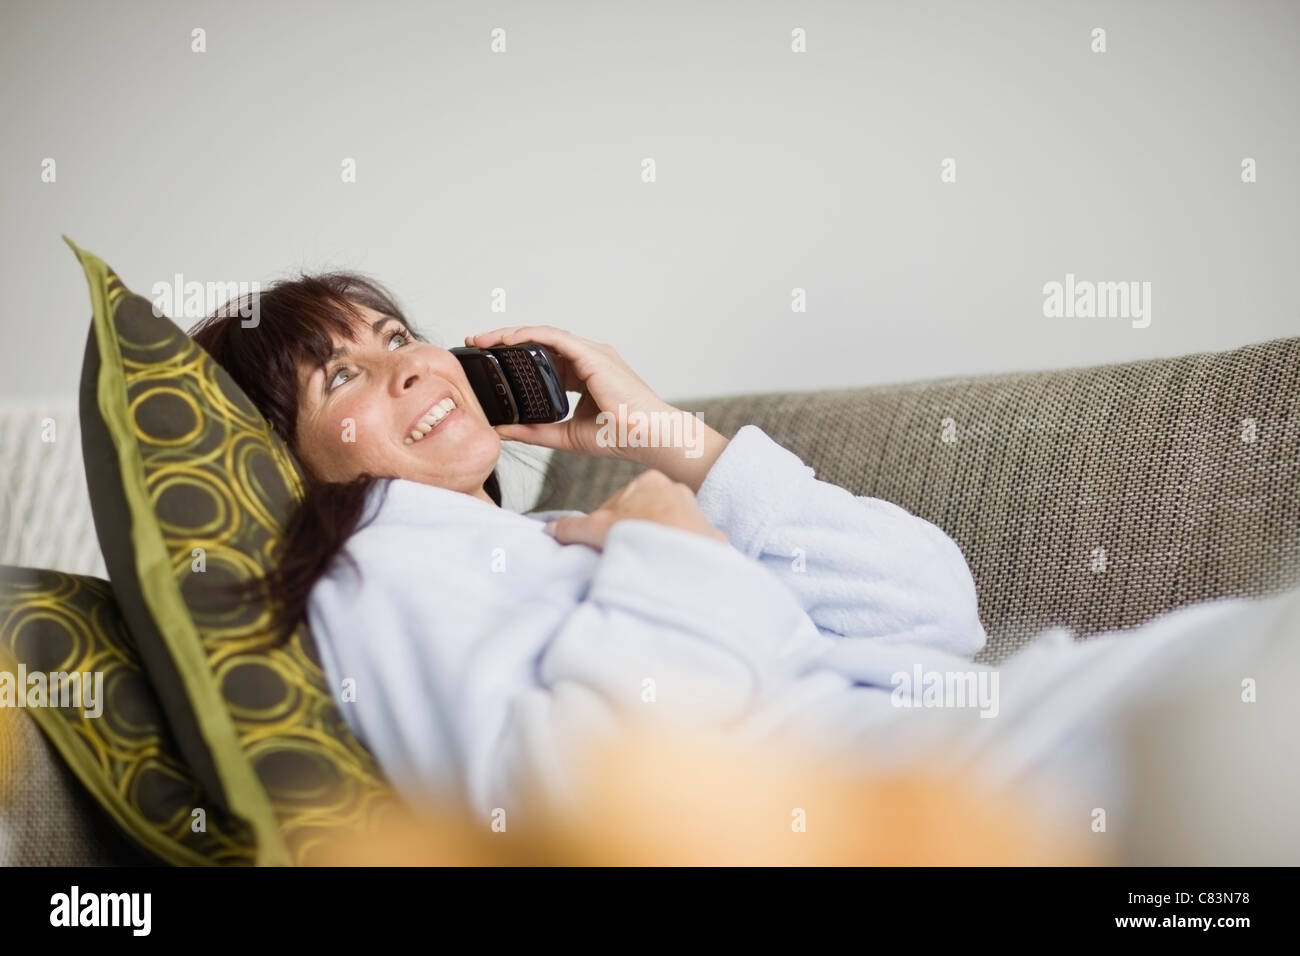 Woman in bathrobe talking on phone Banque D'Images